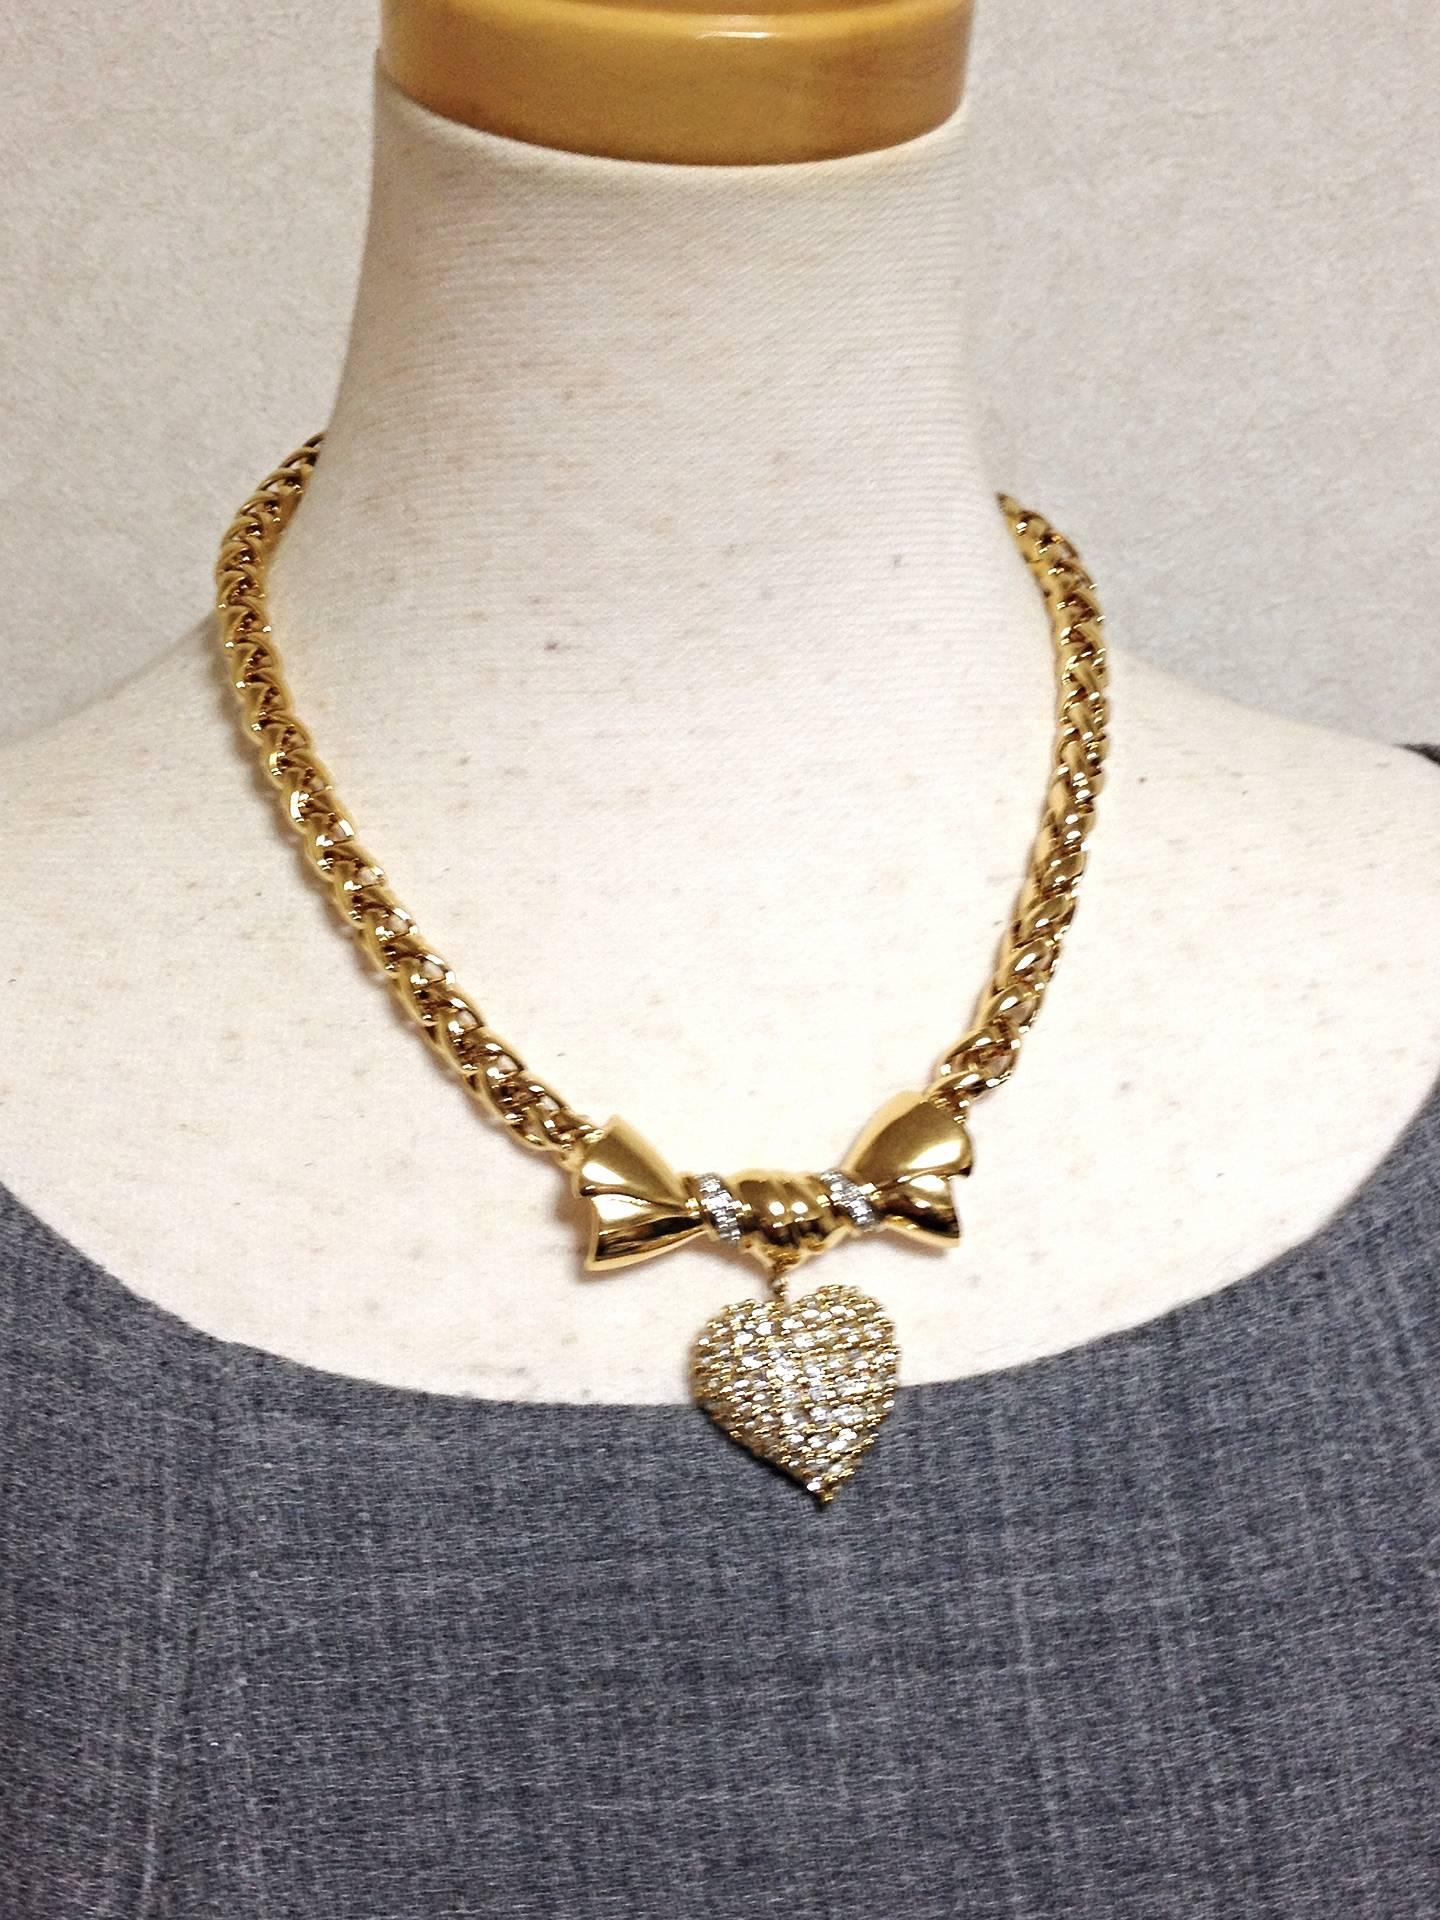 Women's MINT. Vintage Nina RIcci golden chain statement necklace with bow and heart top For Sale